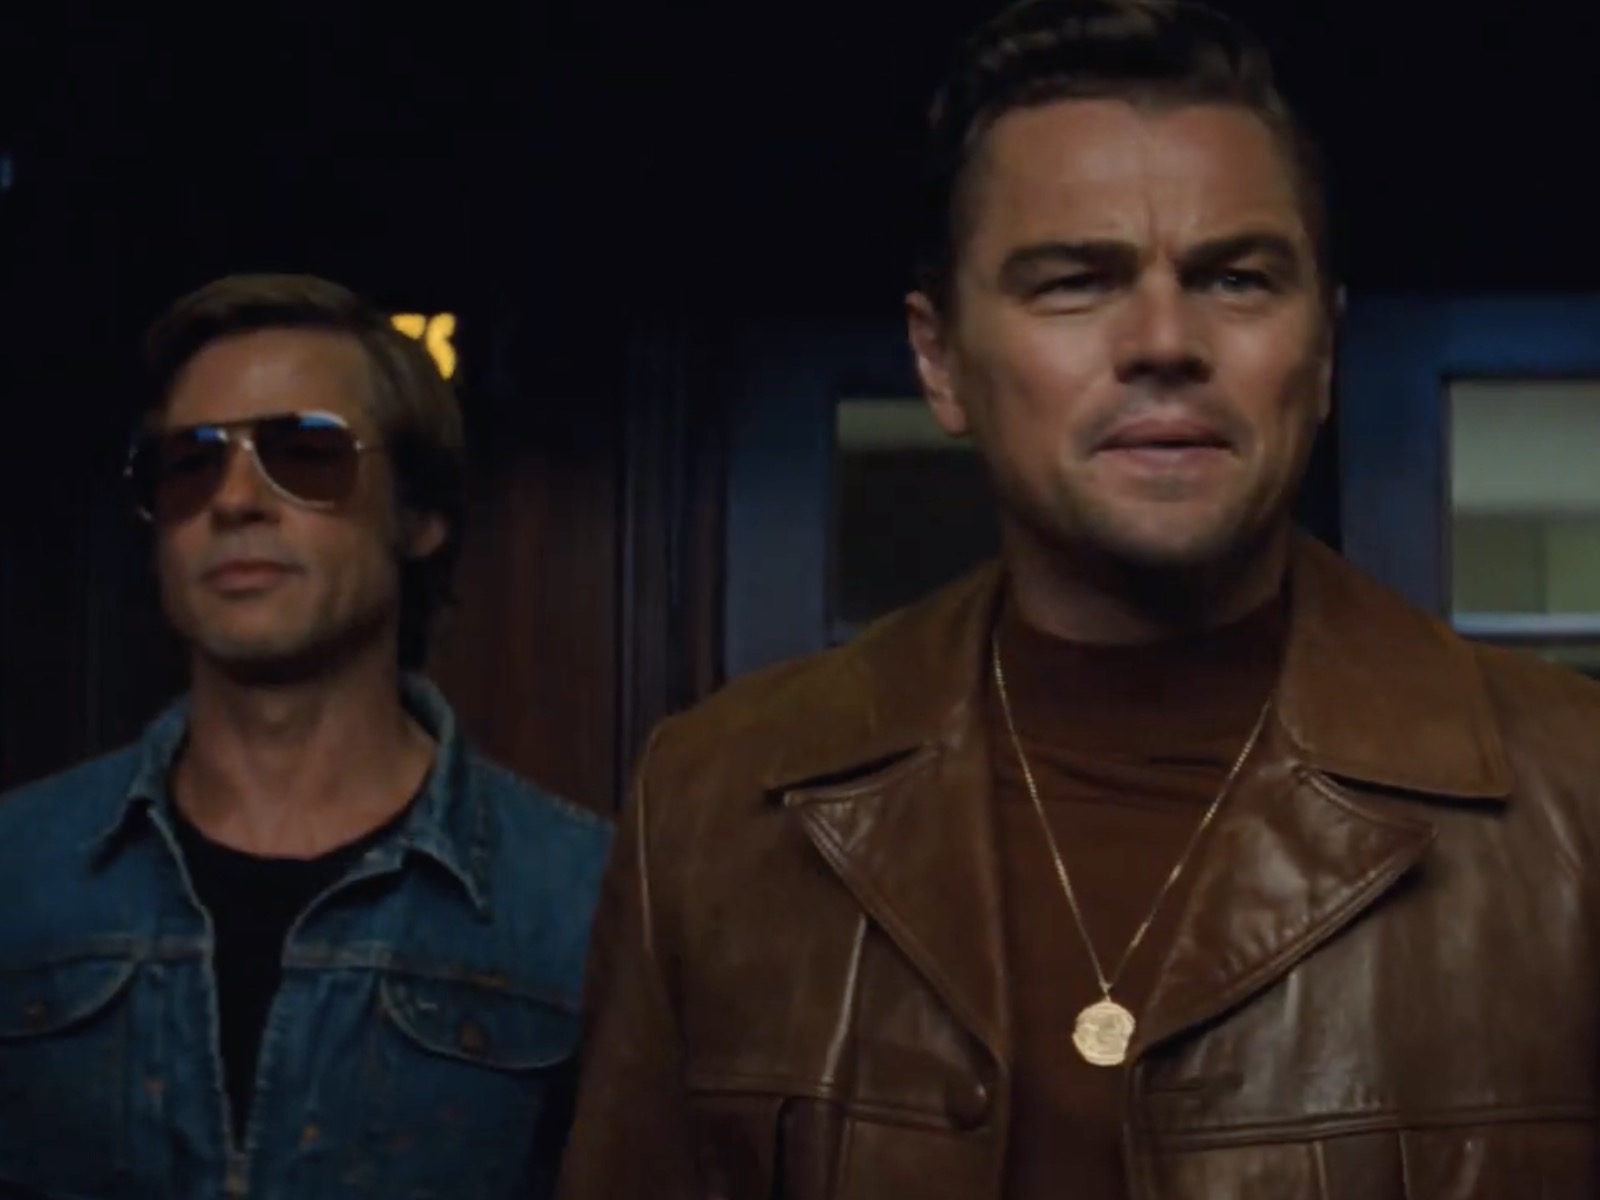 Watch: Quentin Tarantino's ONCE UPON A TIME IN HOLLYWOOD Trailer Is Here – SOHH.com